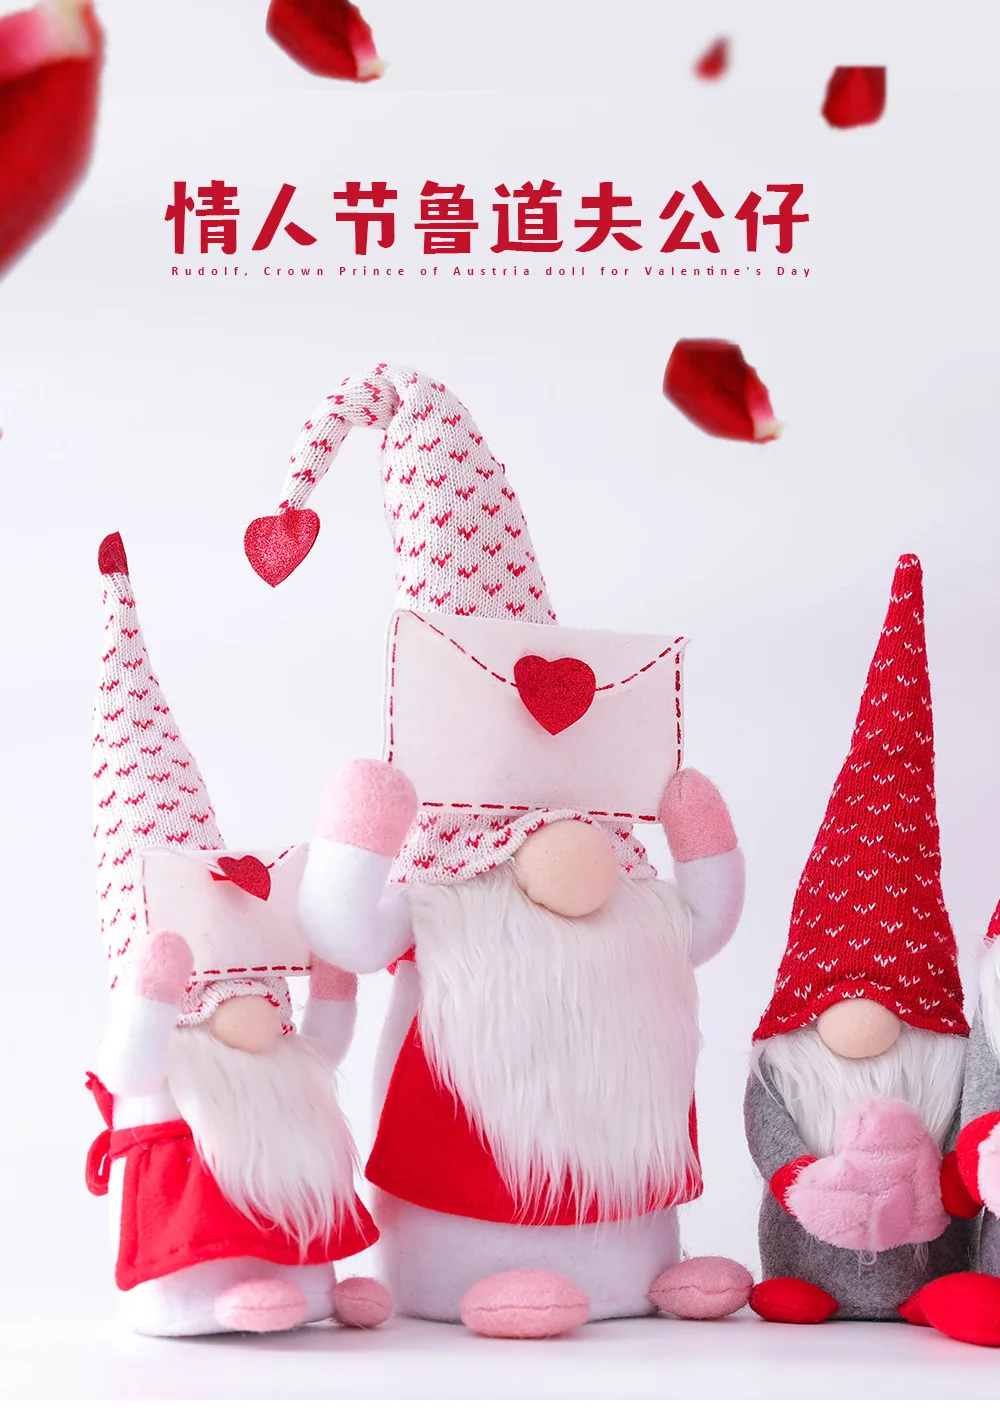 New Faceless Dwarf Doll Cute Desktop Decoration Happy Valentine's Day Desktop Decoration Ornaments for Home Festival Party Gifts